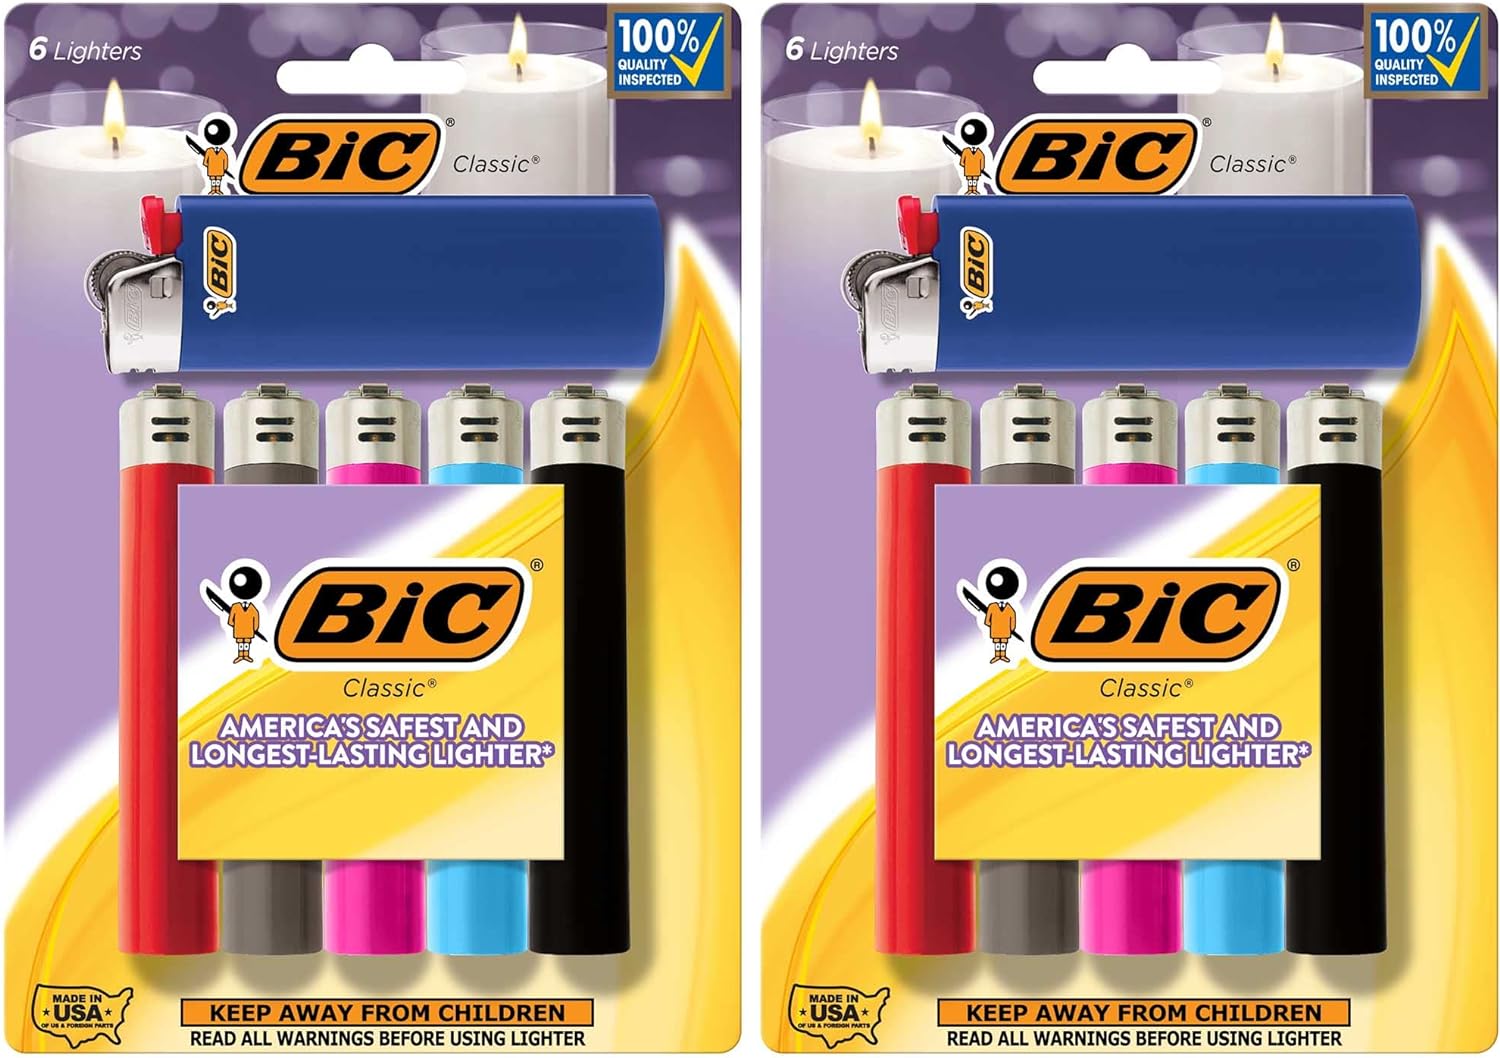 BIC Pocket Lighter, Classic Collection, Assorted Unique Lighter Colors, 12 Count Pack of Lighters